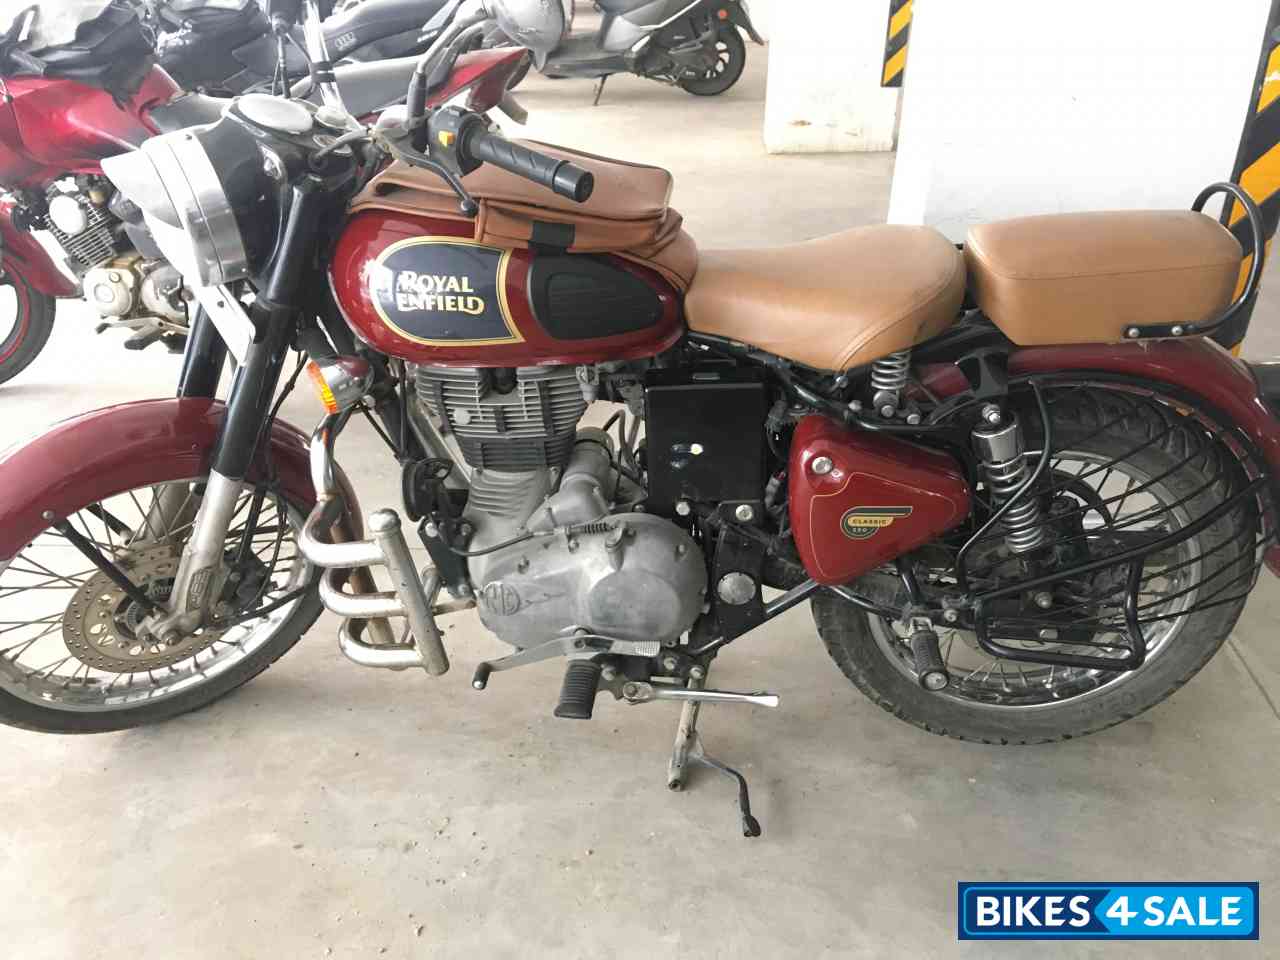 Chestnut (maroon) Royal Enfield Classic 350